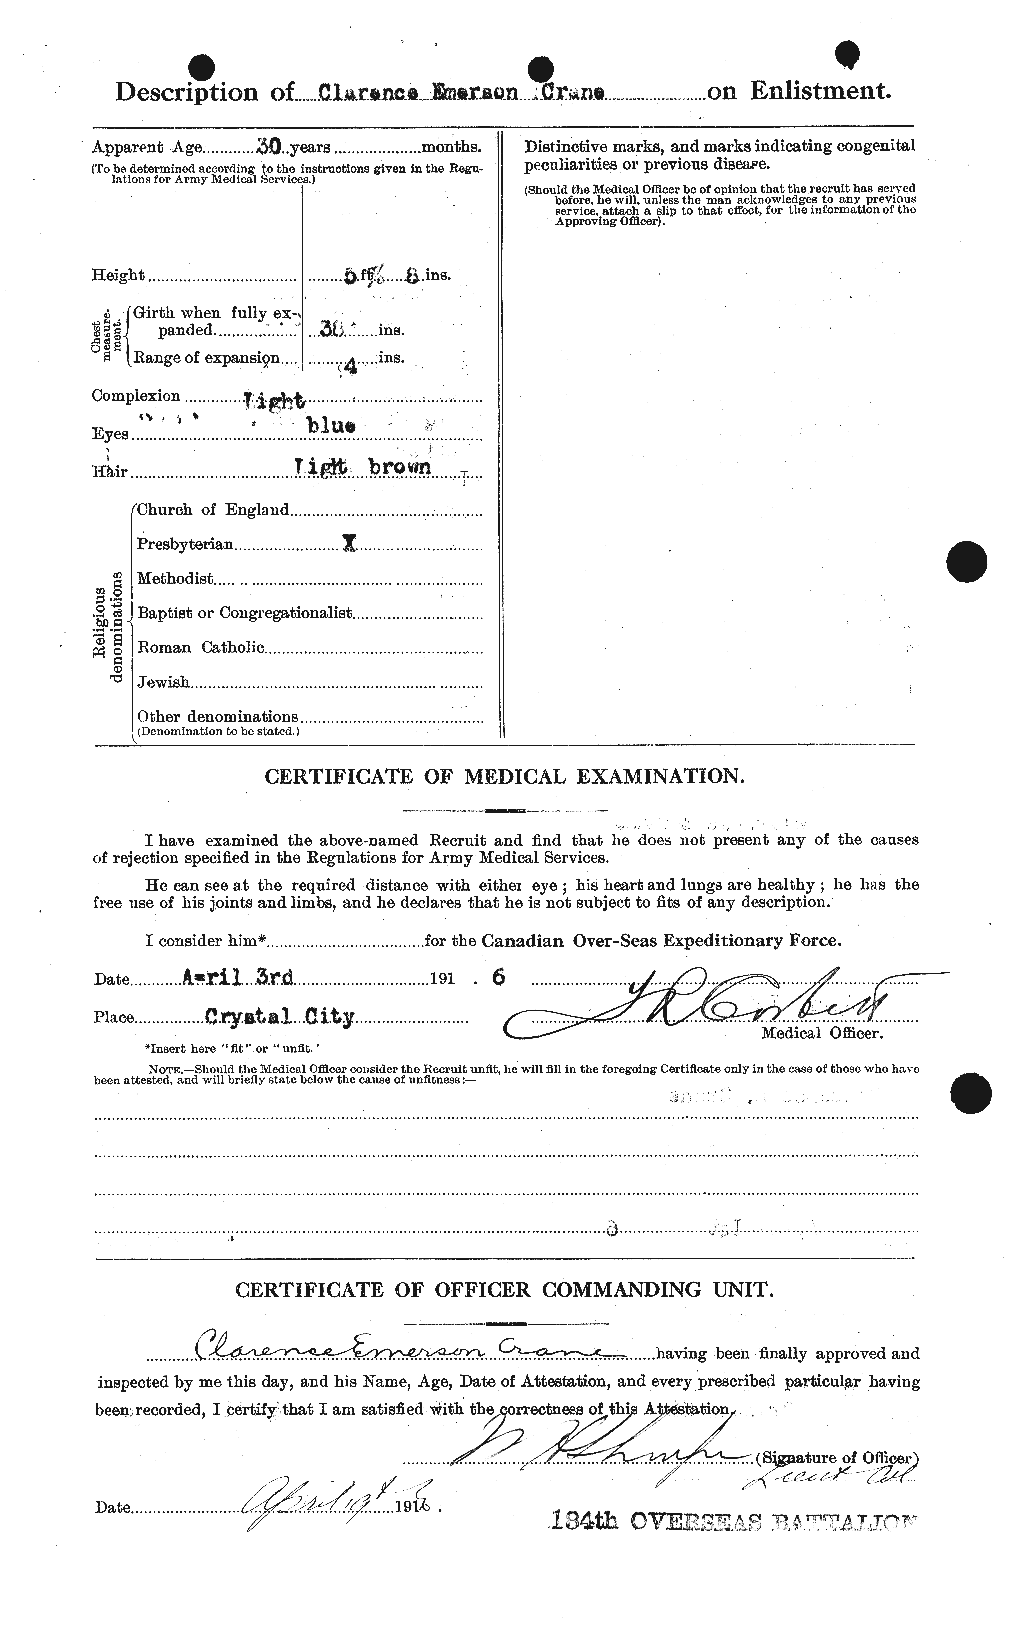 Personnel Records of the First World War - CEF 062022b